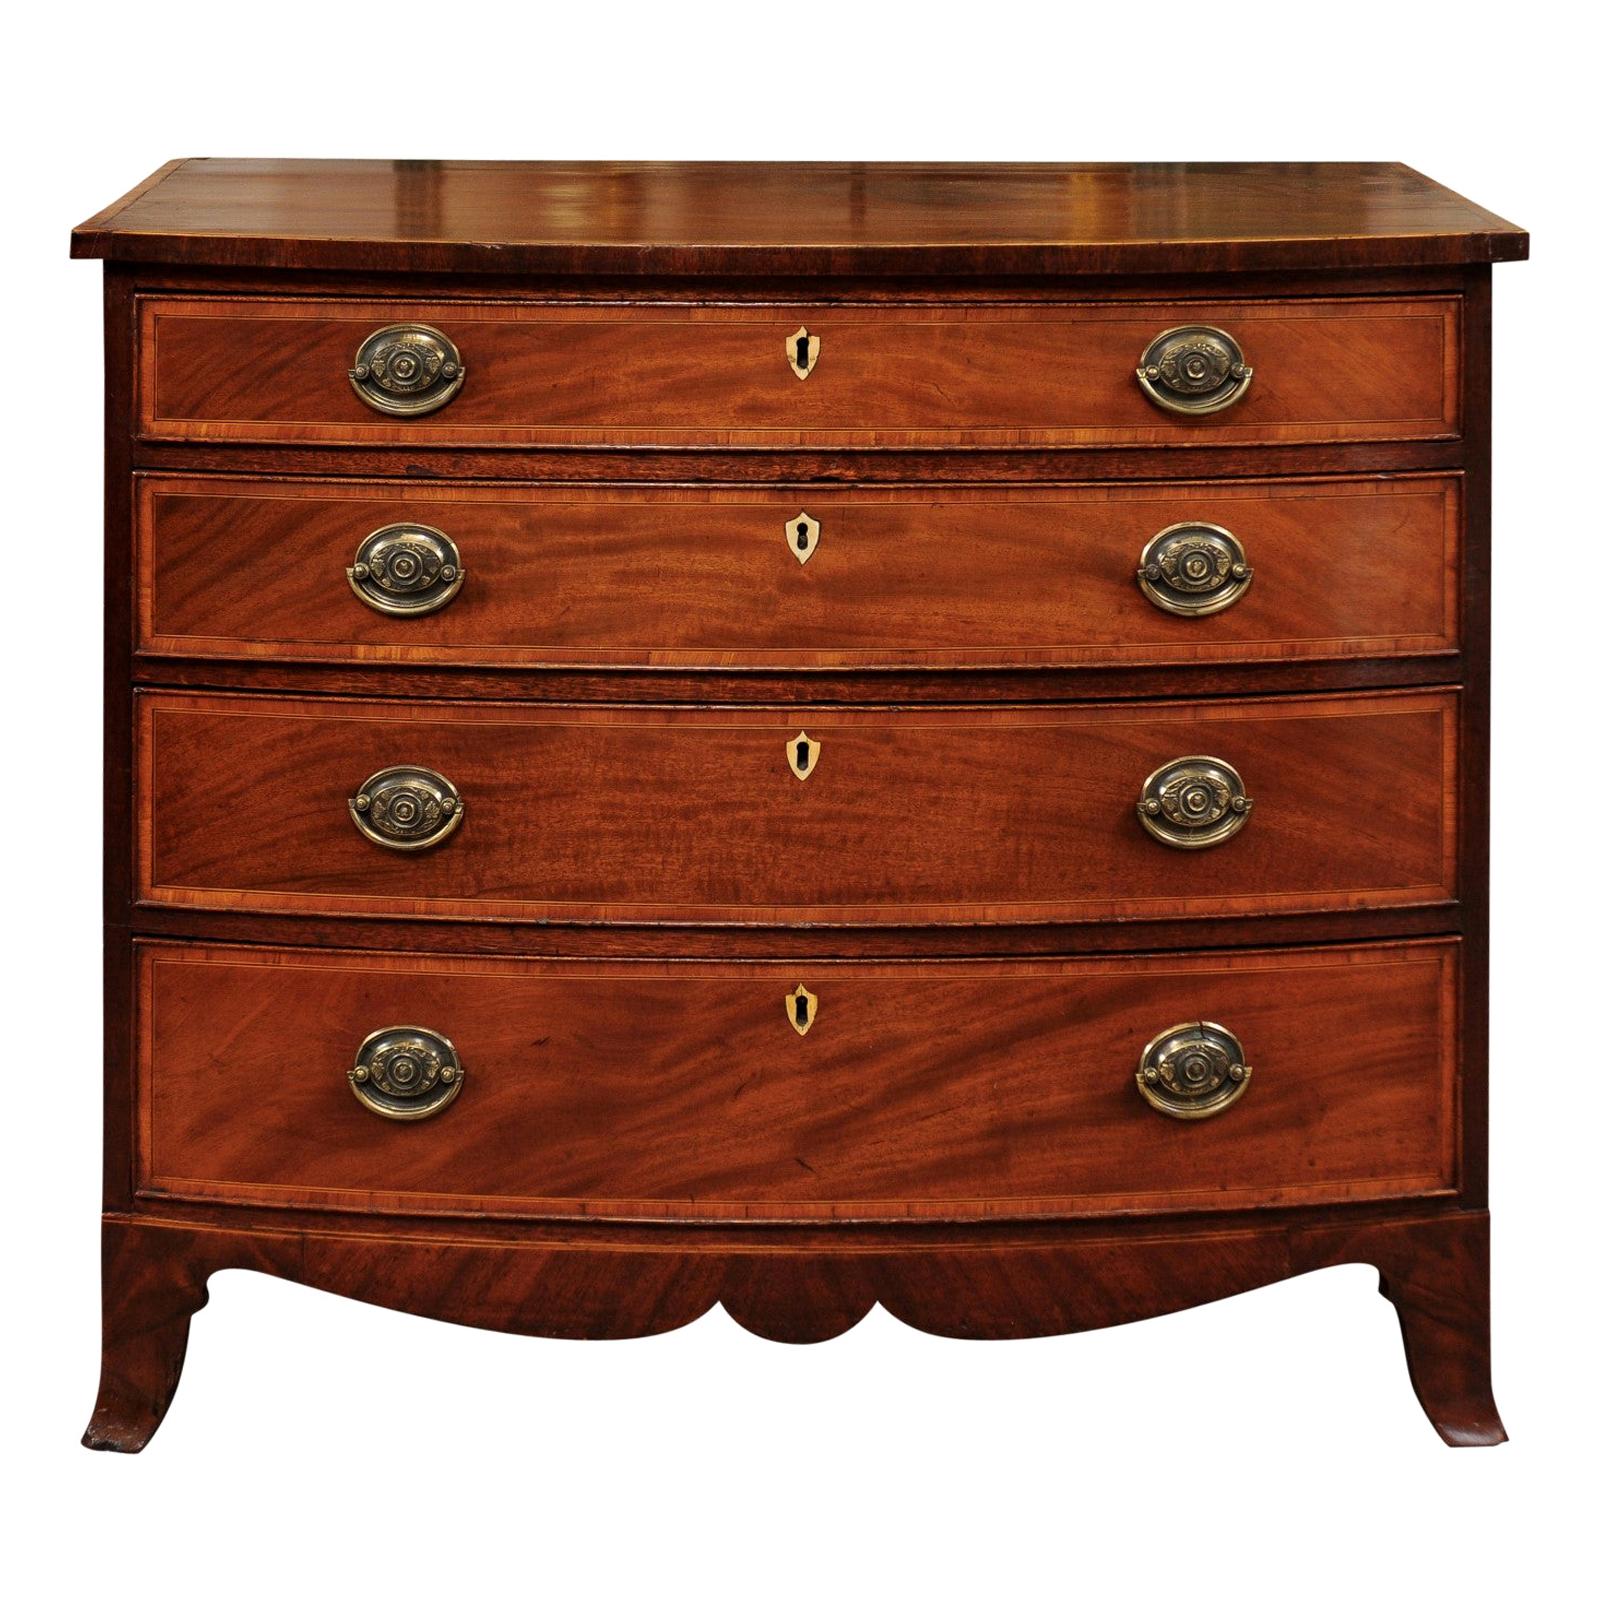 Early 19th Century English Sheraton Bowfront Chest with Splay Feet